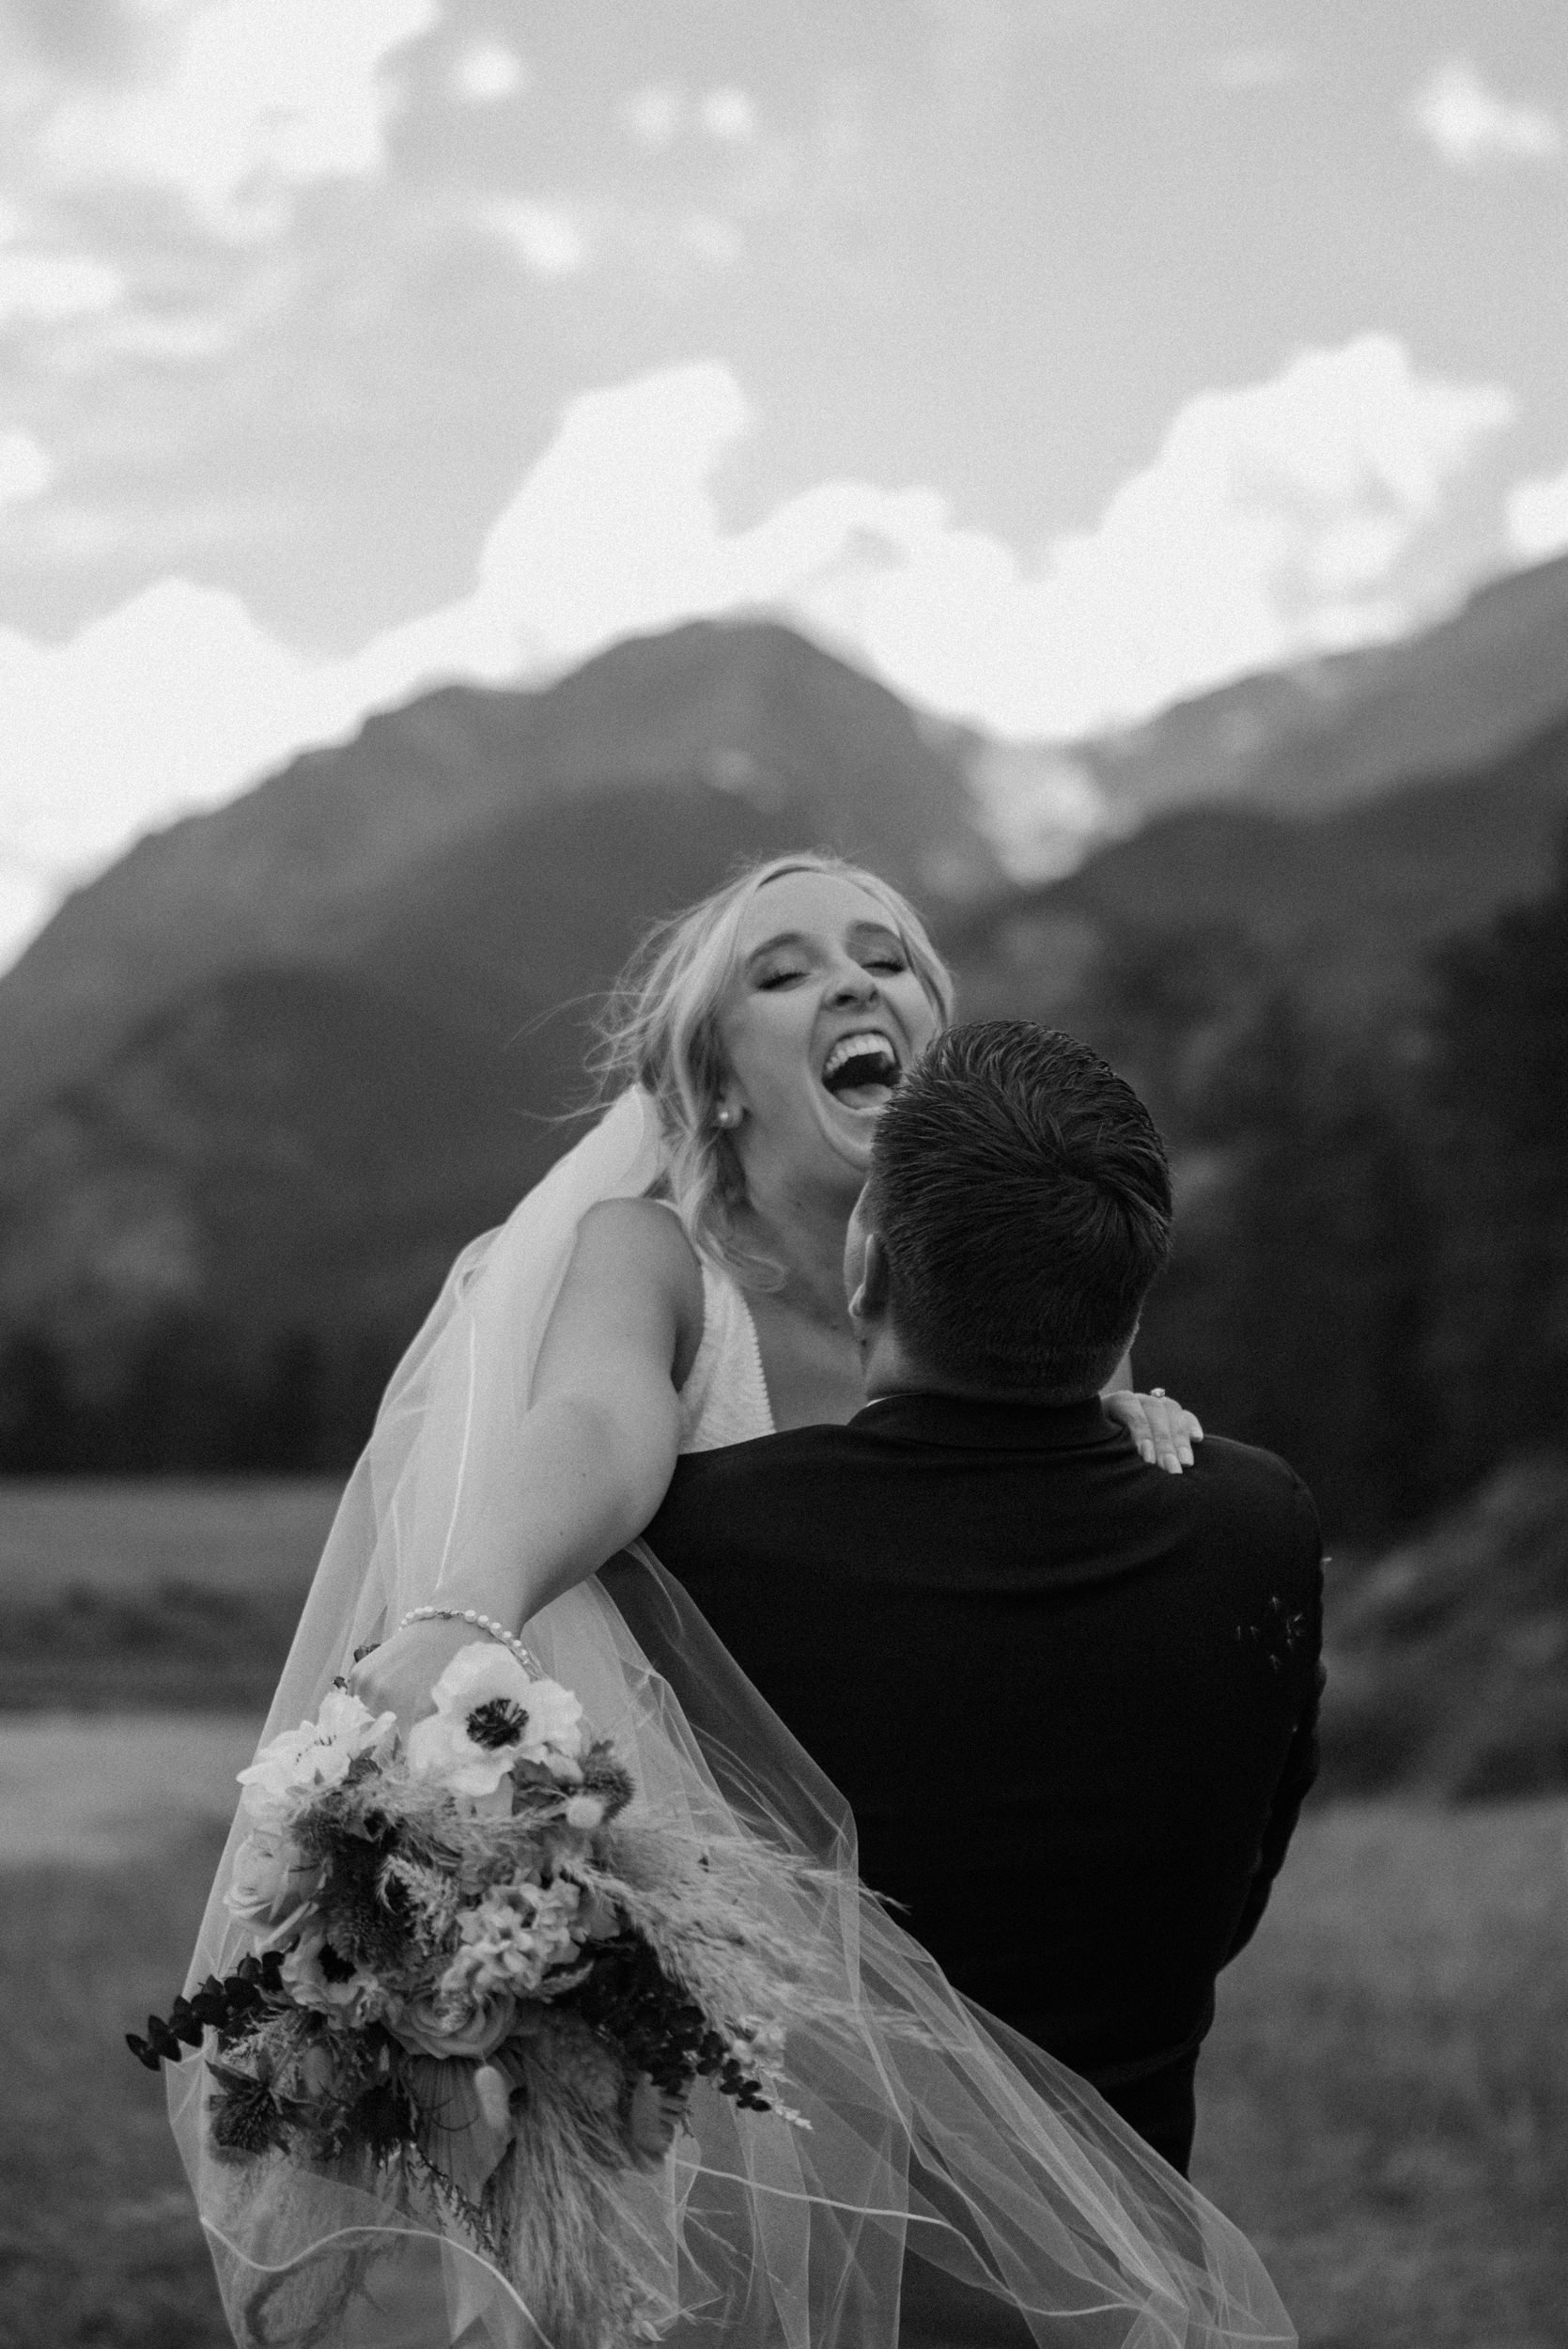 The bride laughs as the groom picks her up and twirls her